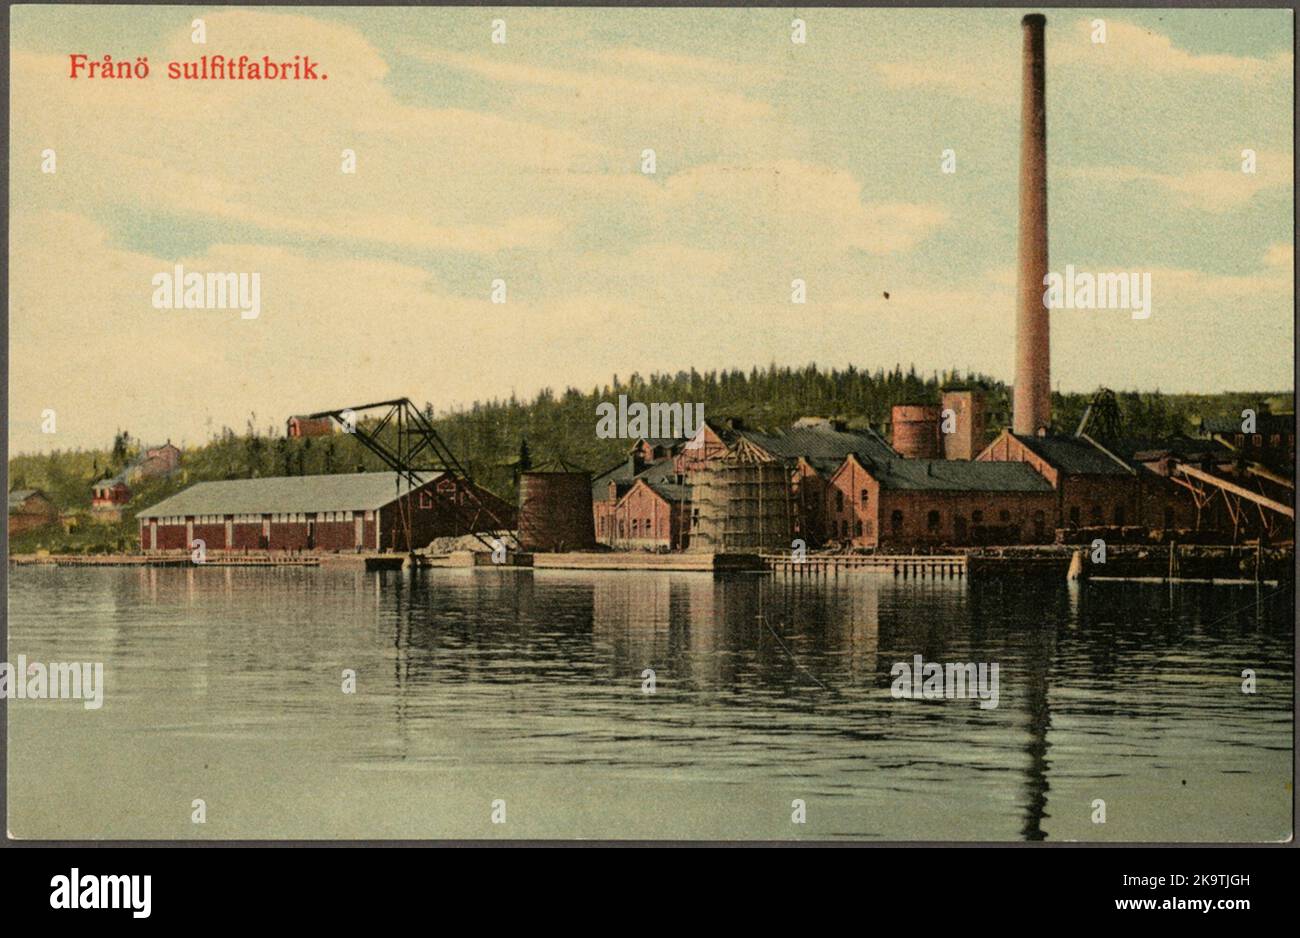 FRACK SULFIT FABILITY by the Ångerman River. Stock Photo